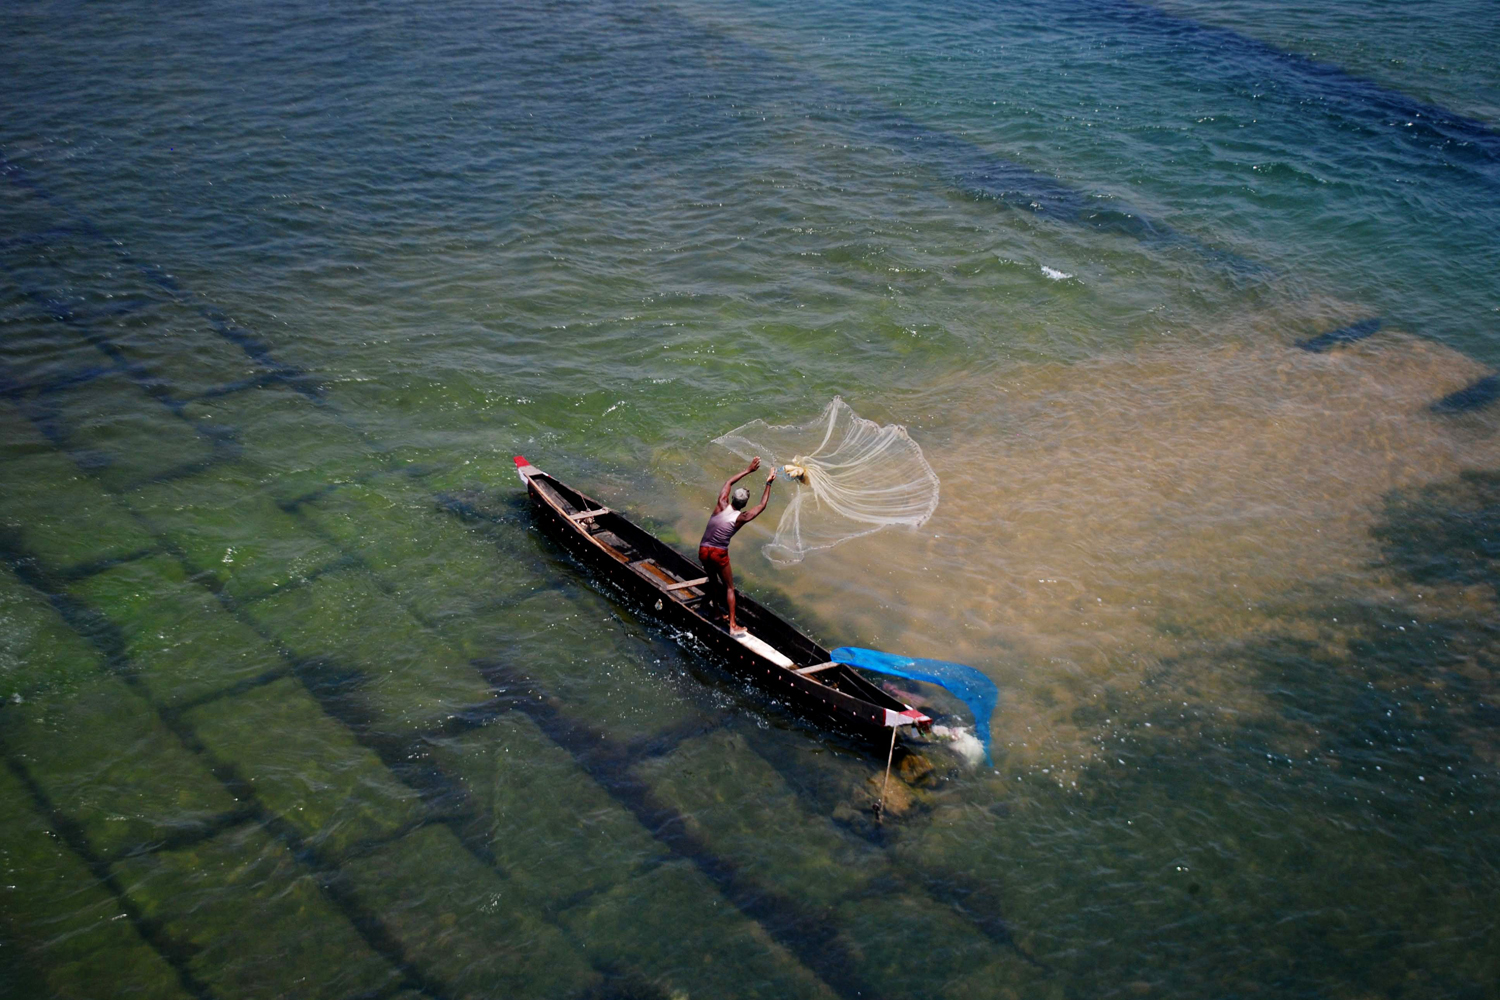 May 1, 2014. A fisherman casts his net into the Mohanadi River near Munduli some 30 kms away from Bhubaneswar, India.